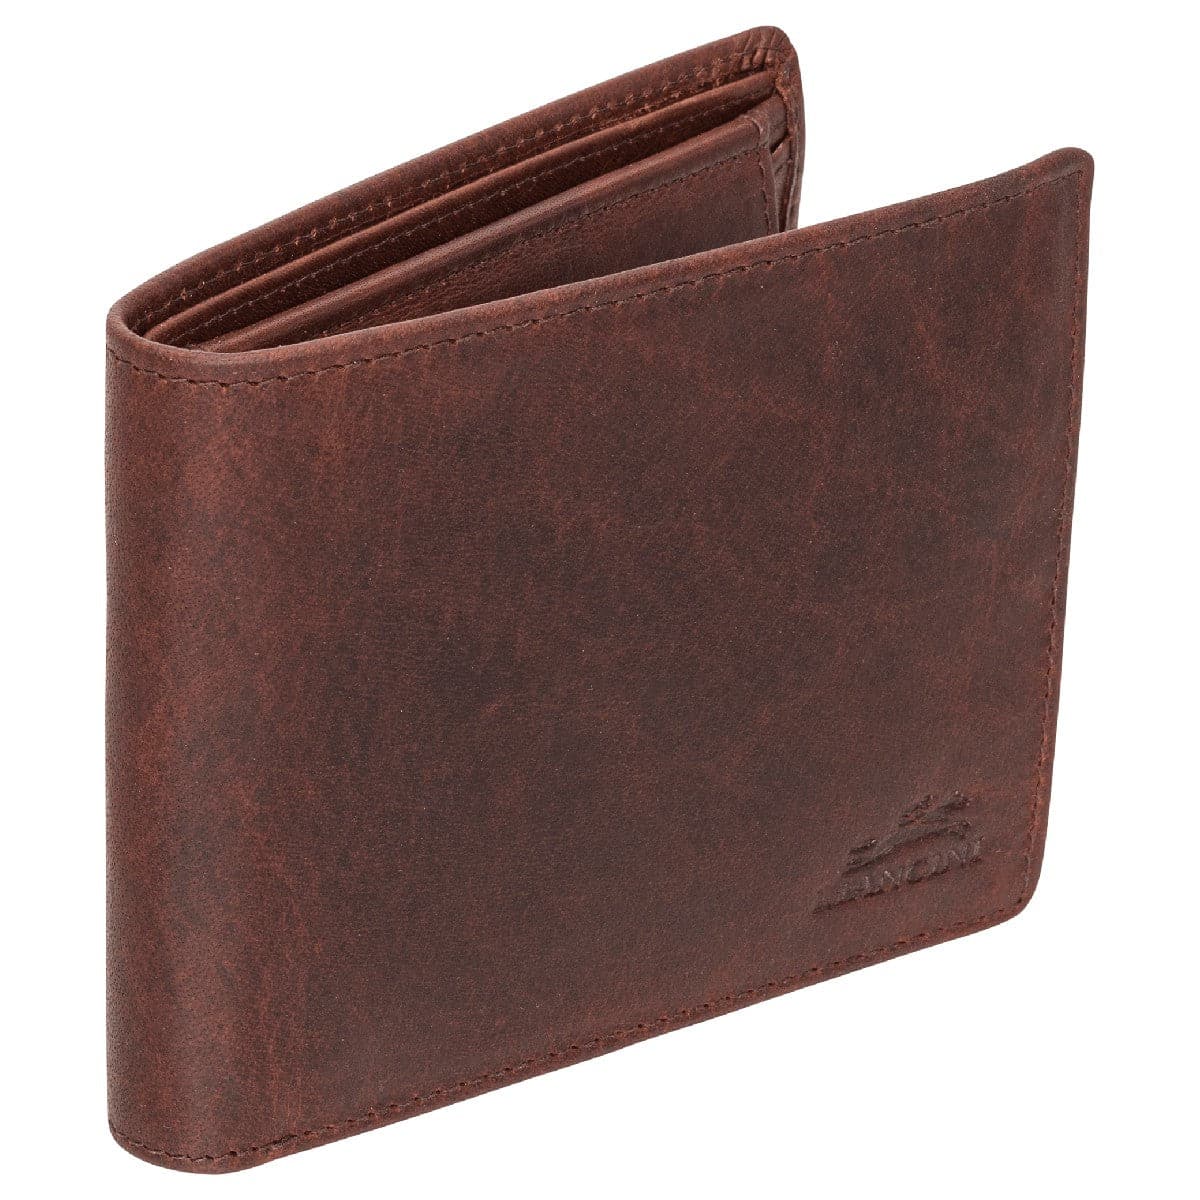 Mancini Buffalo RFID Secure Wallet with Coin Pocket